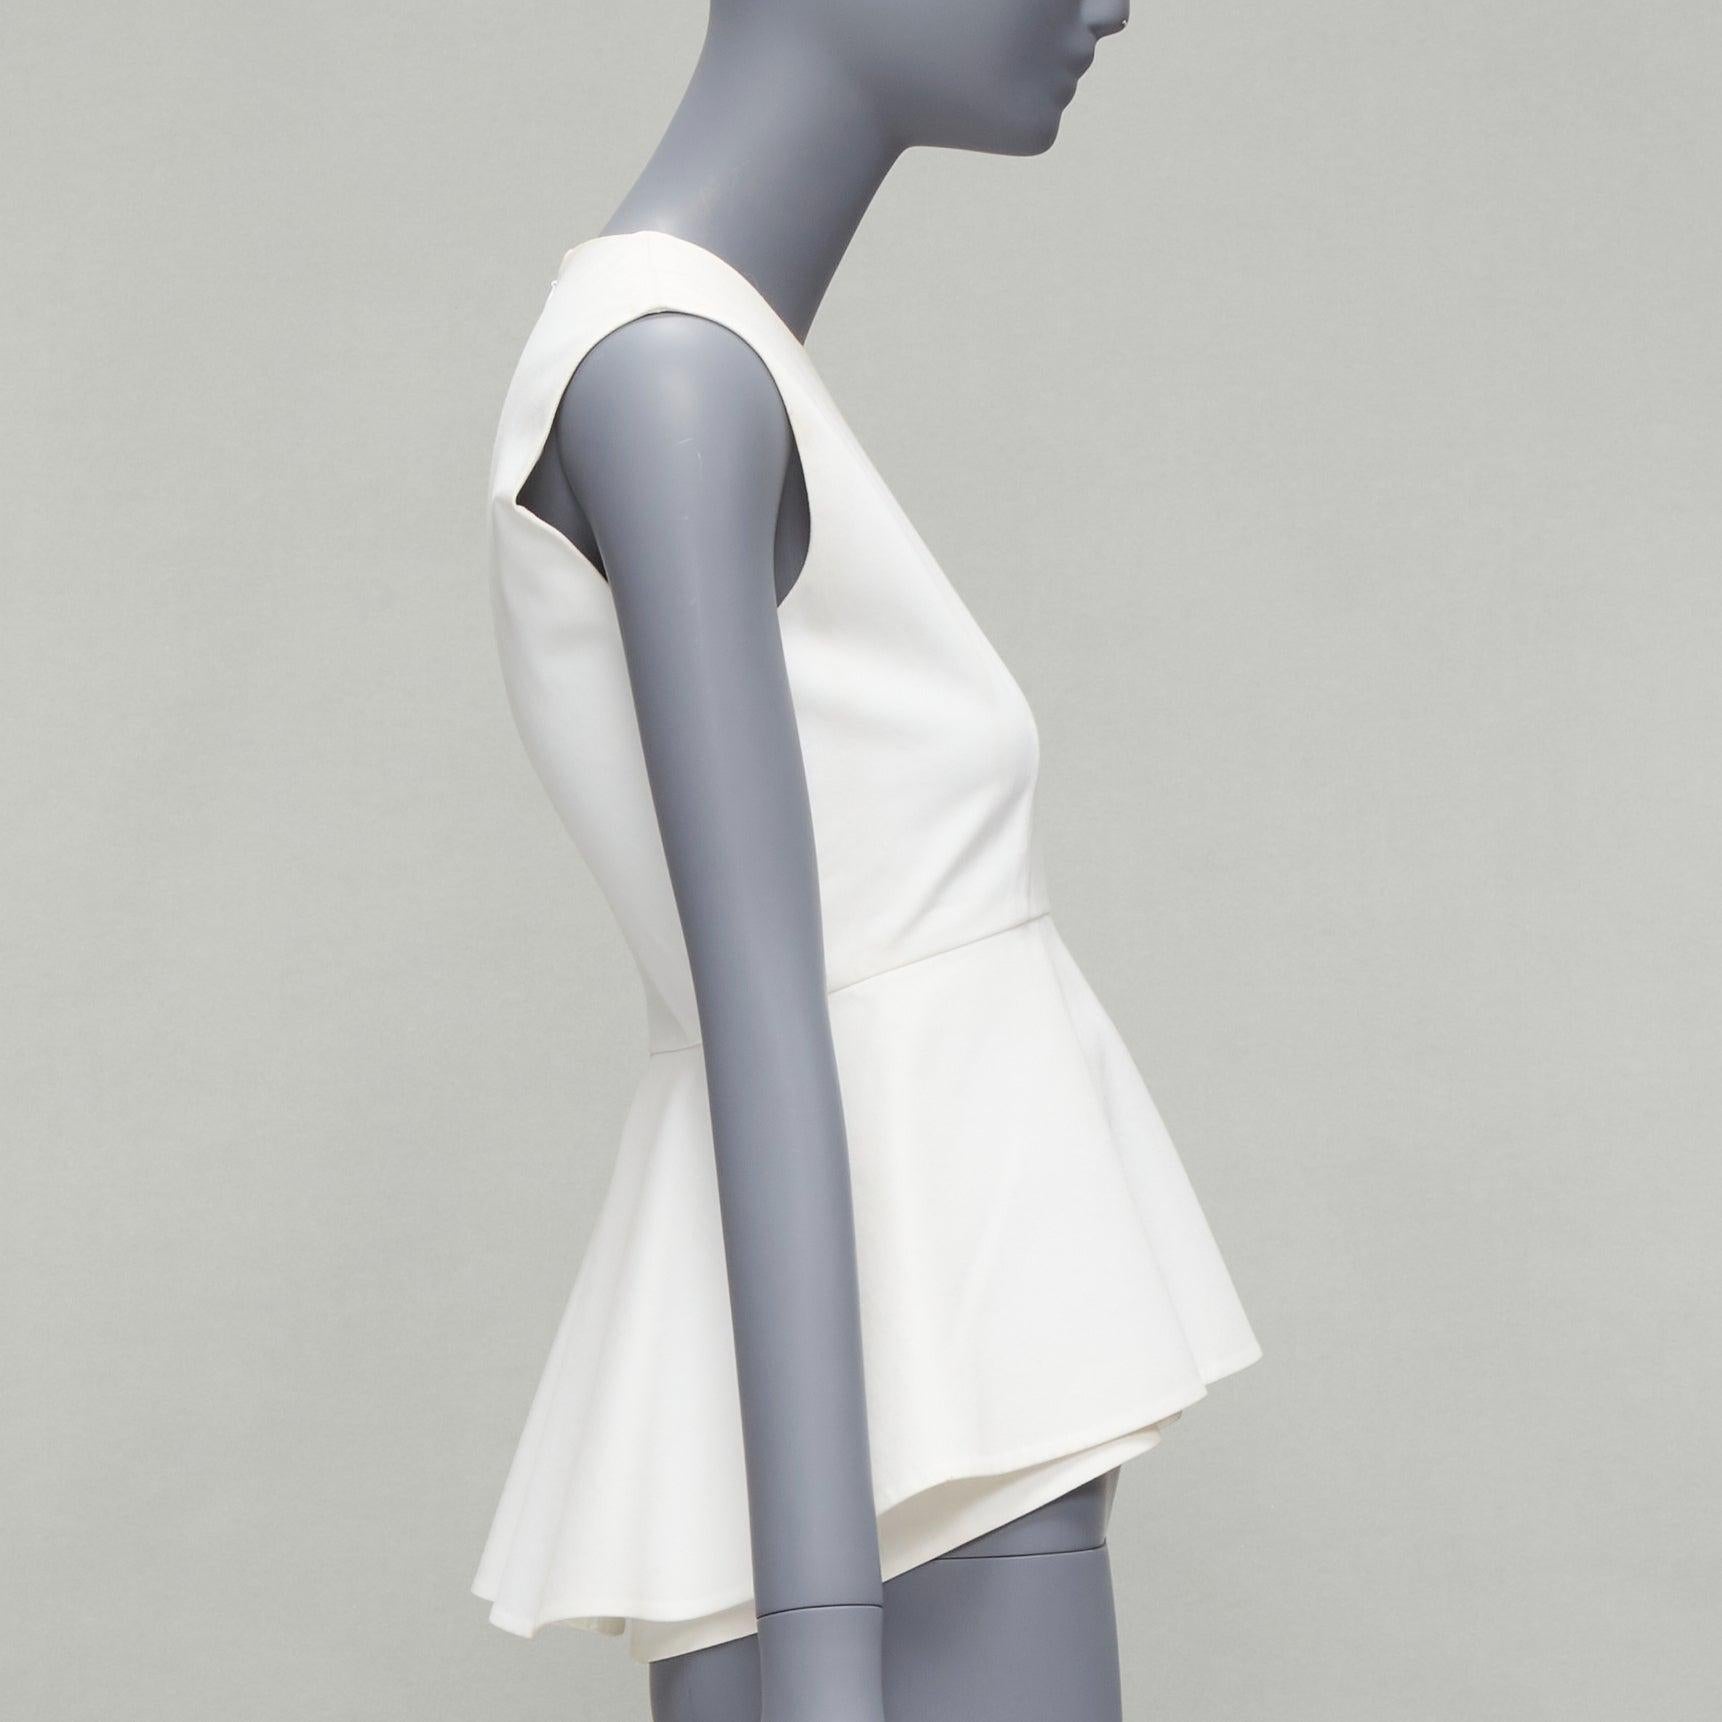 OLD CELINE Phoebe Philo 2012 white cotton peplum sleeveless fitted top FR34 XS
Reference: SNKO/A00223
Brand: Celine
Designer: Phoebe Philo
Material: Cotton
Color: White
Pattern: Solid
Closure: Zip
Lining: White Cotton
Extra Details: Back zip detail.